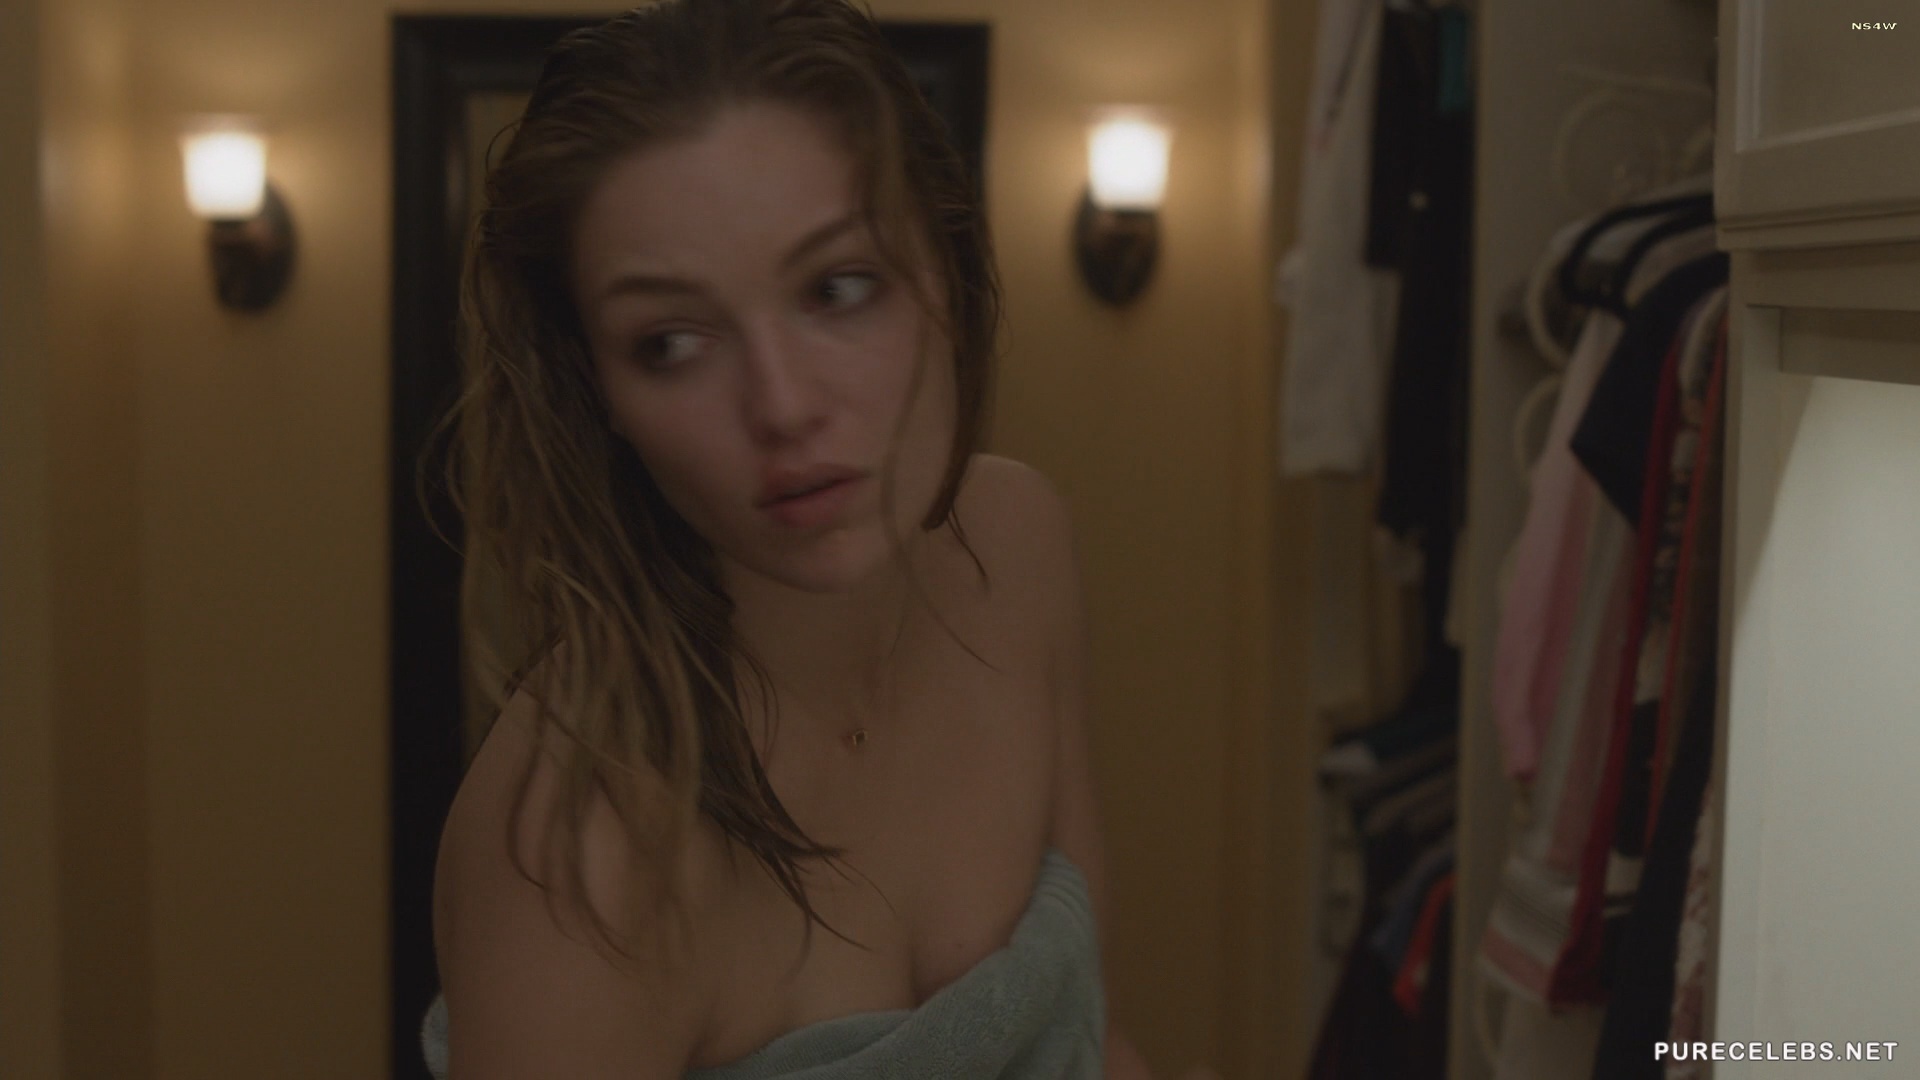 Known for her role in Cinemax series Banshee, Lili Simmons has been raising...